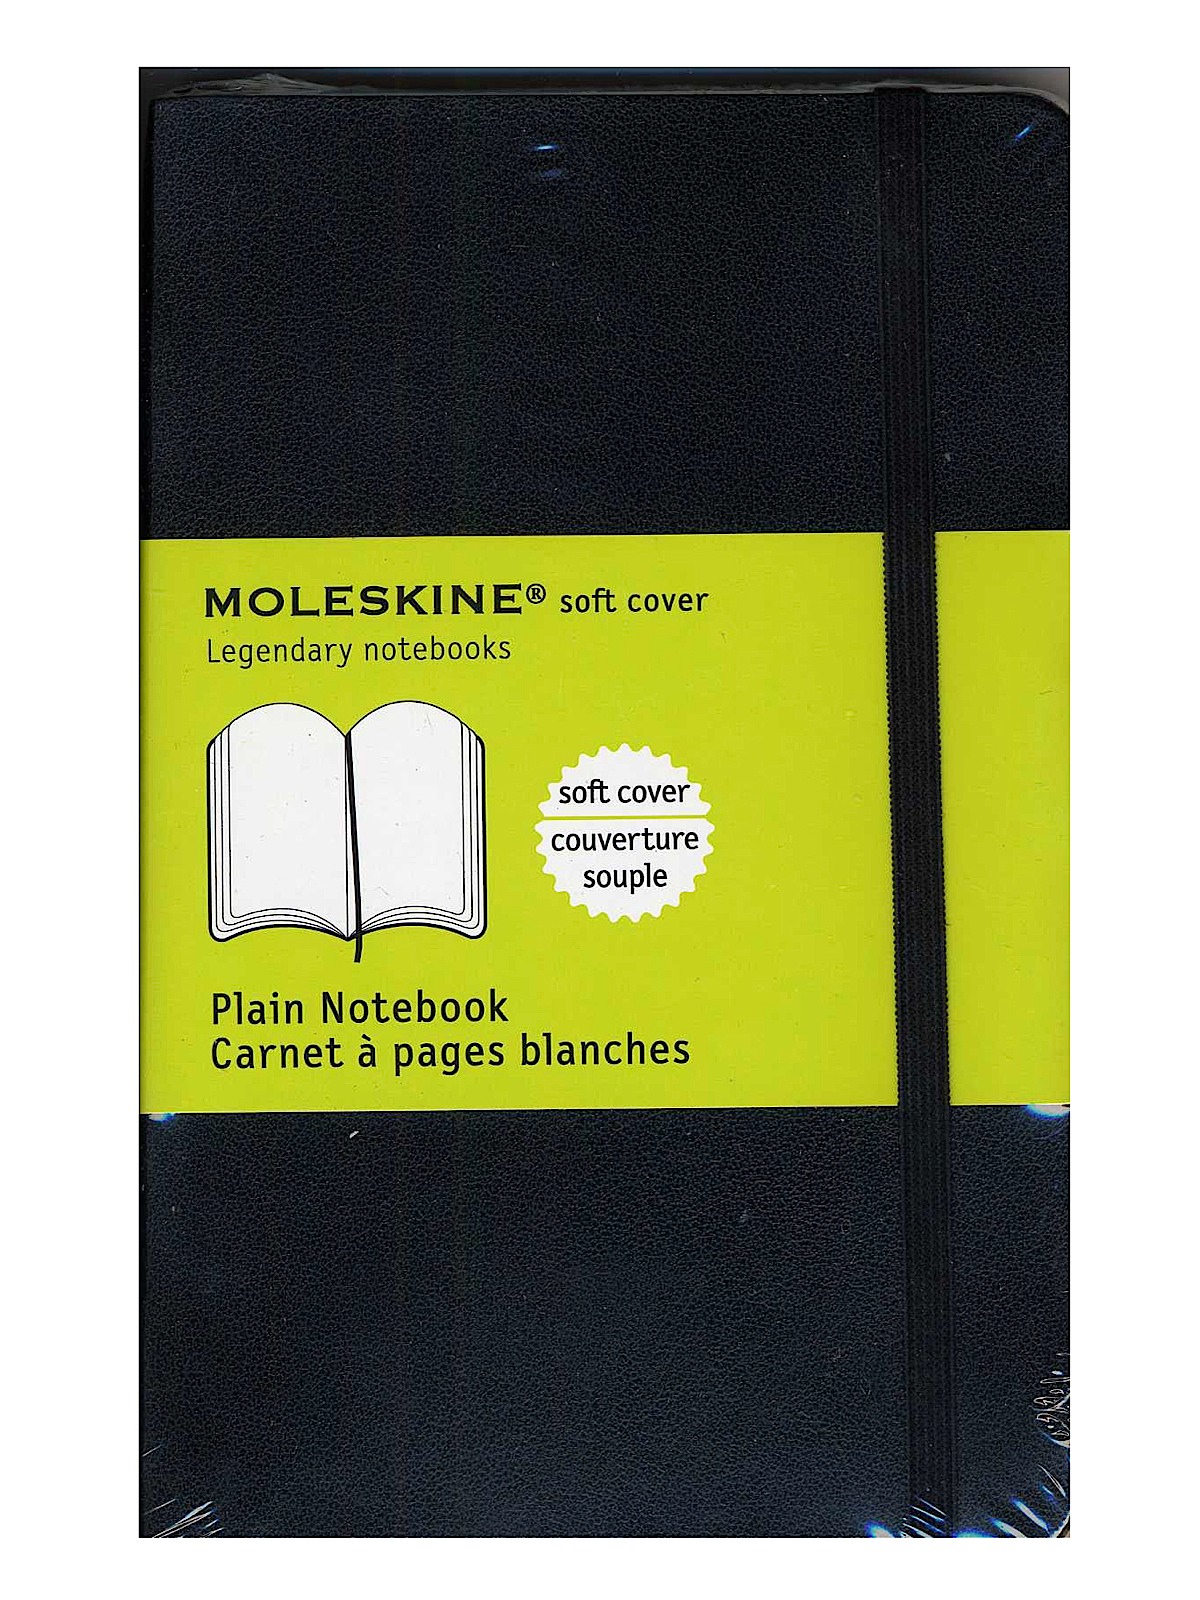 Classic Soft Cover Notebooks Black 3 1 2 In. X 5 1 2 In. 192 Pages, Unlined